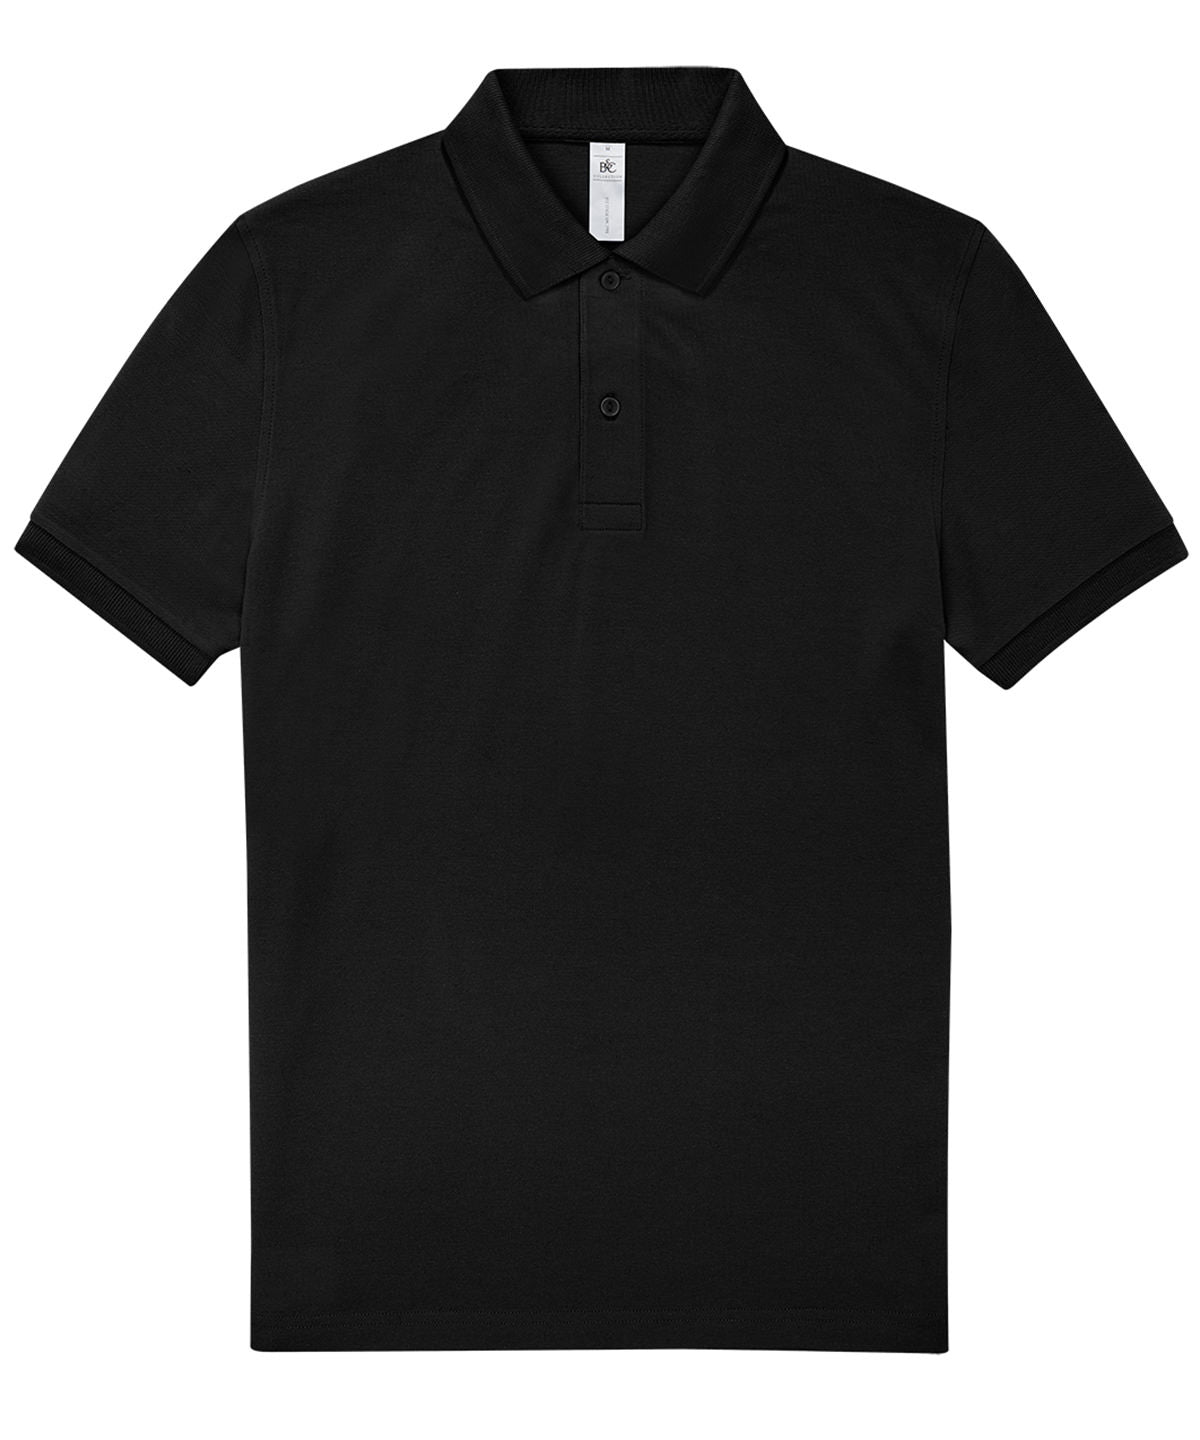 B&C Collection My Polo 210 Black